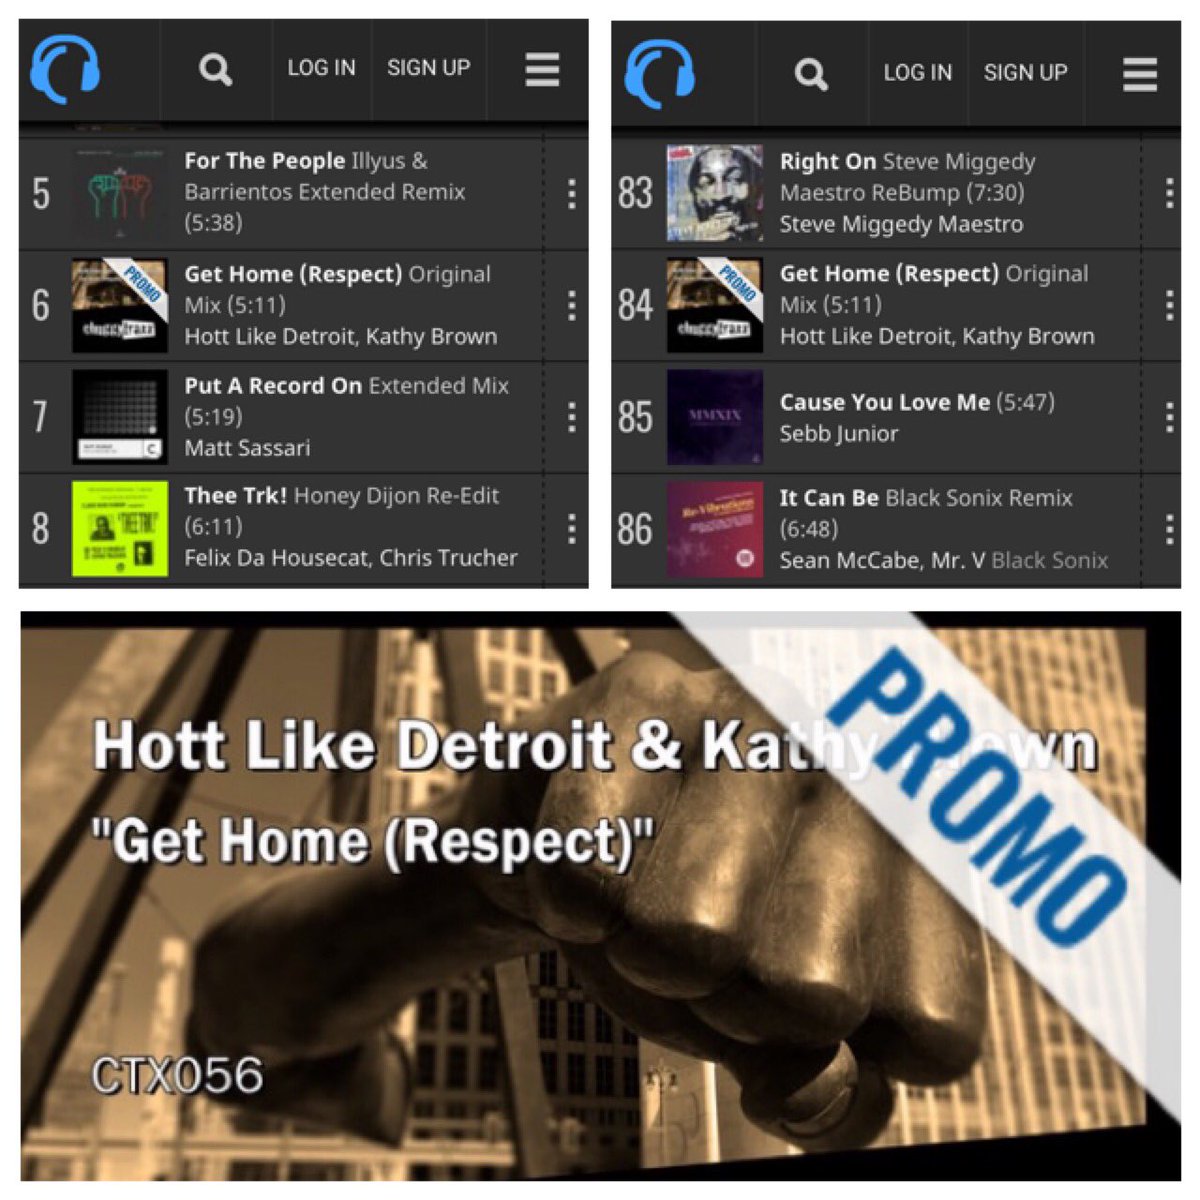 Still riding high in the @traxsource charts - Tech #6 and overall #84 😜🔥🙏🏻 @HottLikeDetroit & @KathybrownDiva “Get Home (Respect)” on @ChuggyTraxx. If you haven’t got it yet, grab it here ⏩ bit.ly/375gyyn #tech #housemusic #chart #dj #banger #respect #newmusic #promo